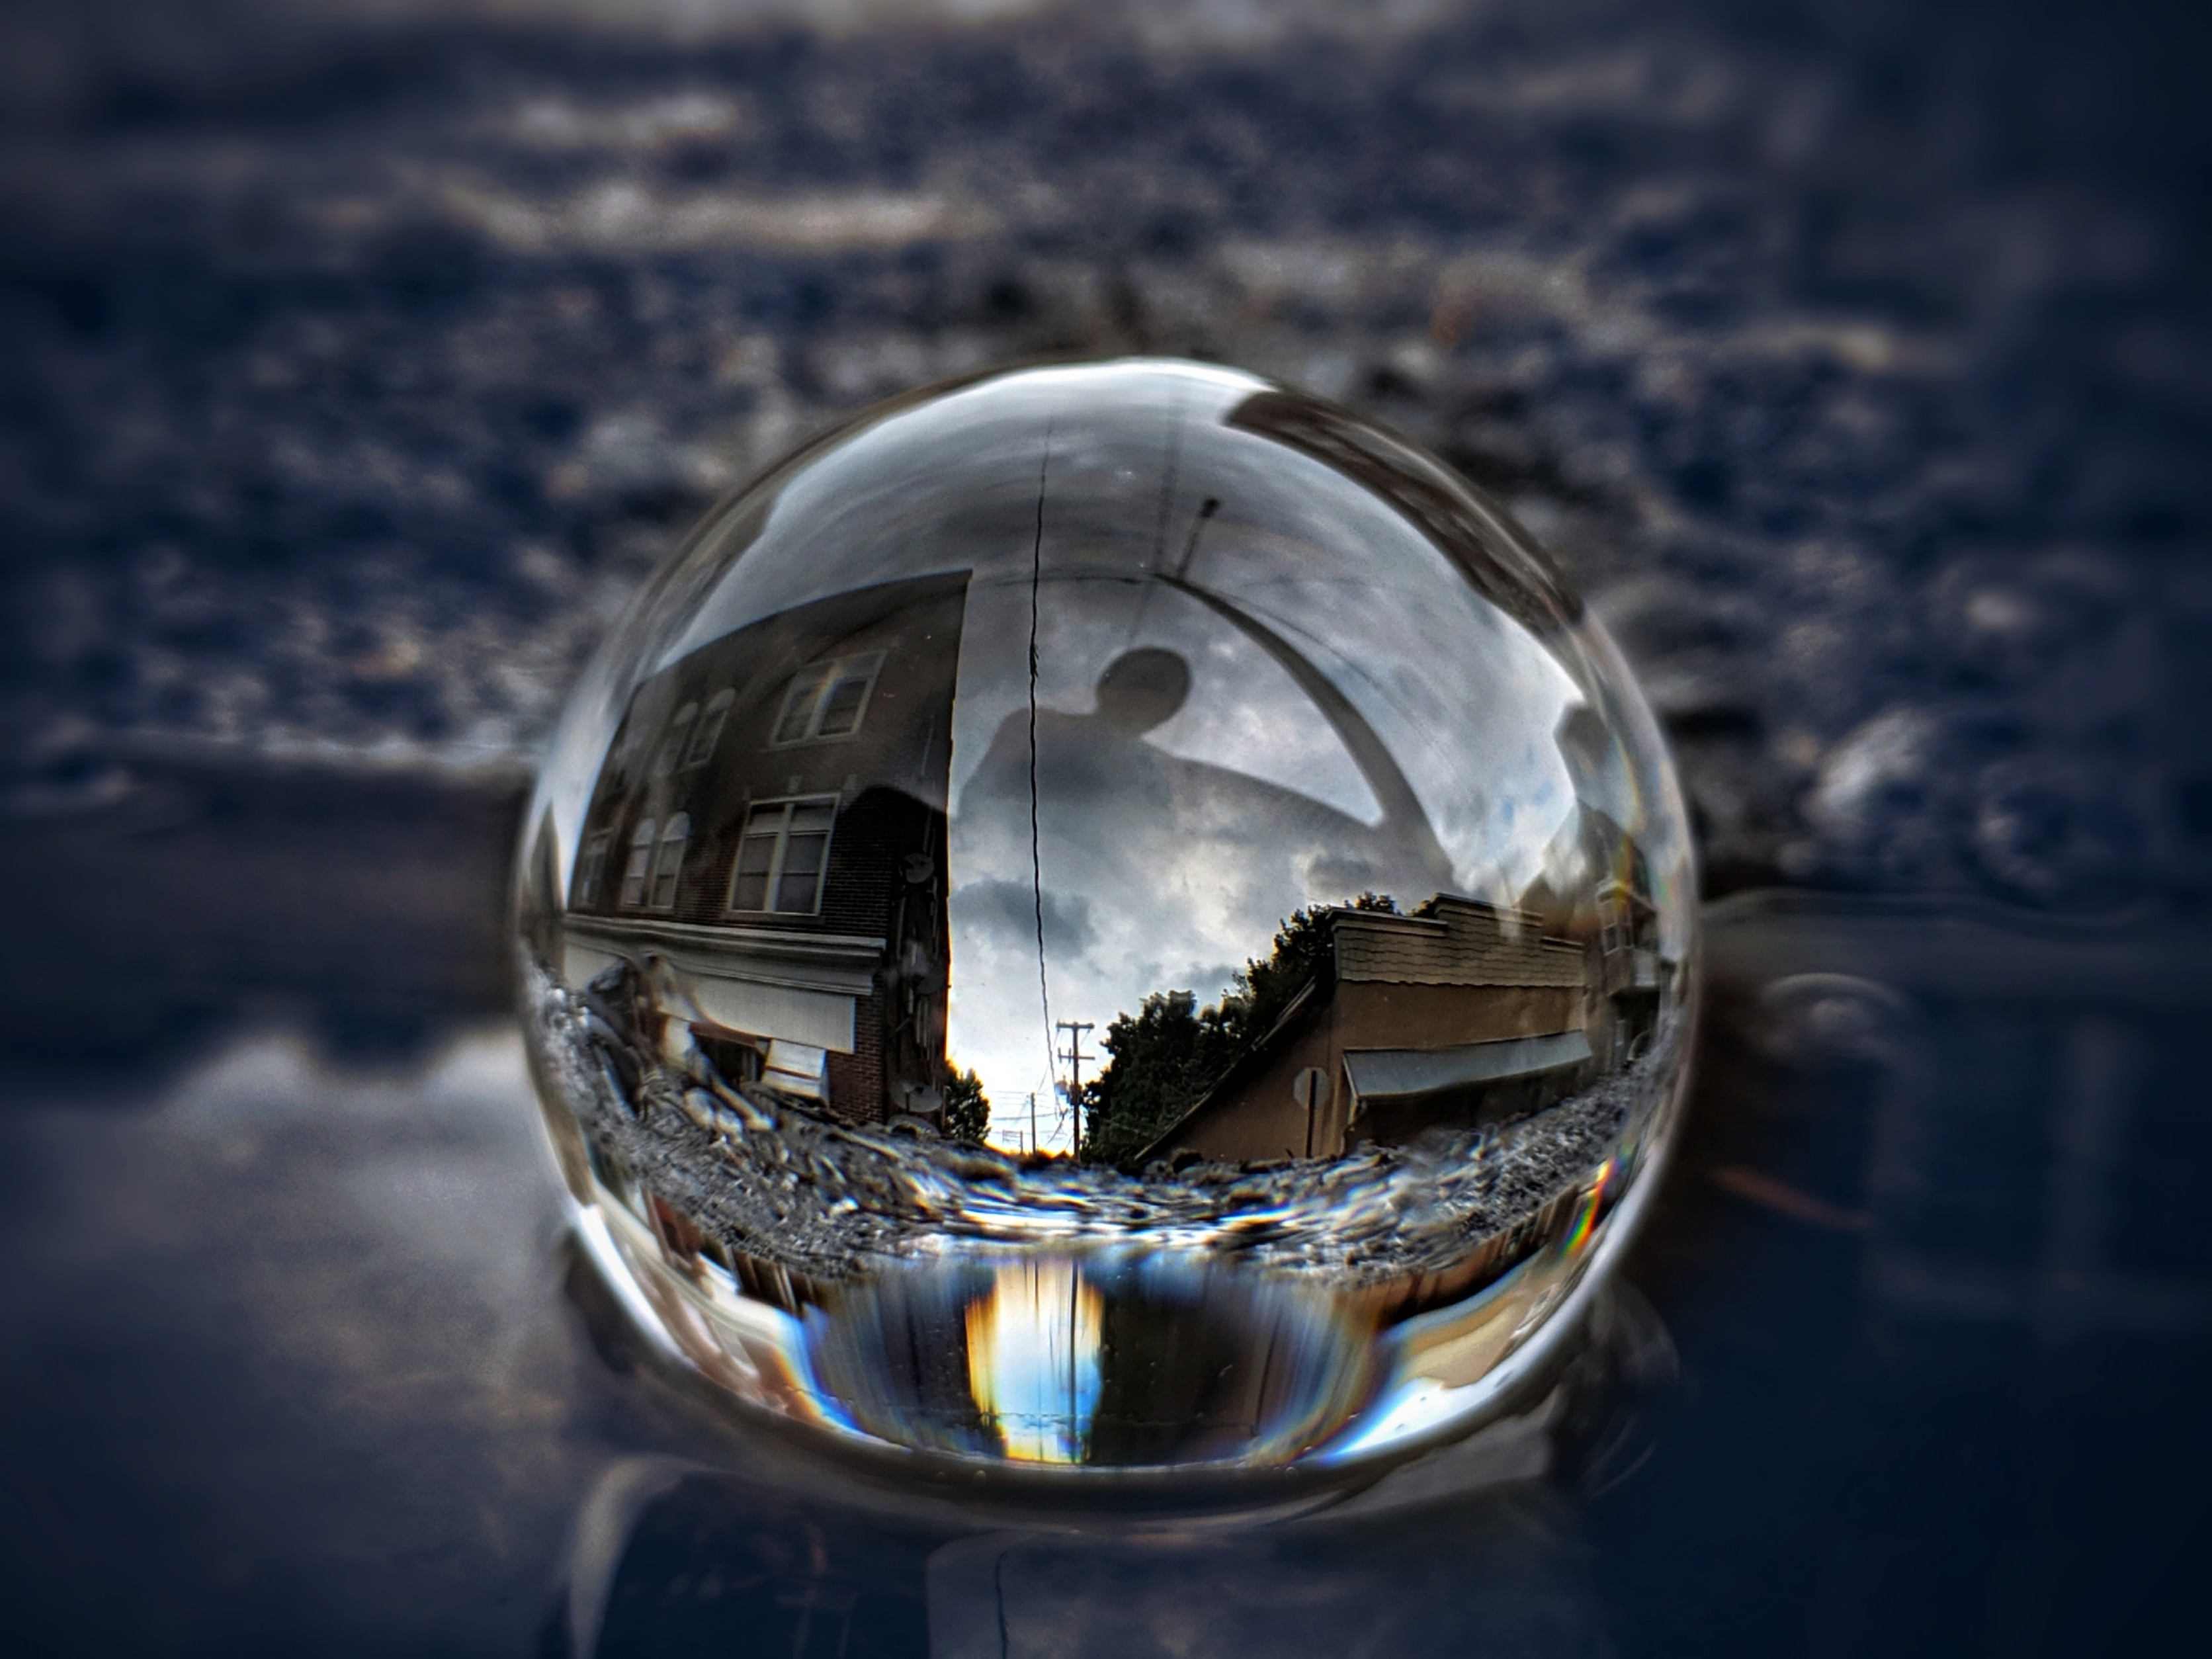 Lensball : HDR Globes from Crazy 360° Panorama…Made With A Rokinon 7